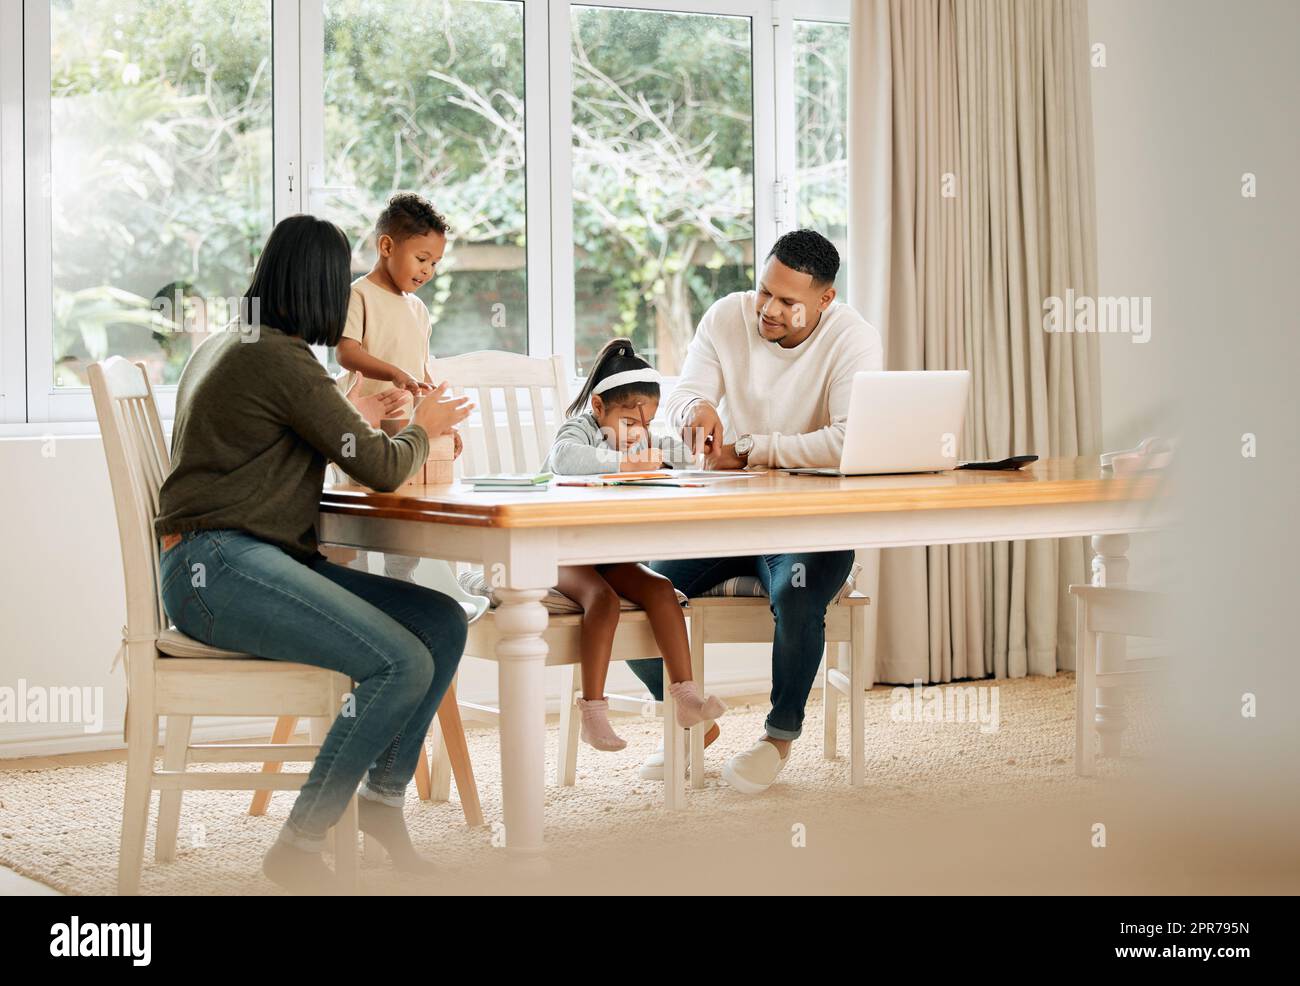 These are the times. Shot of a young family doing homework together at home. Stock Photo